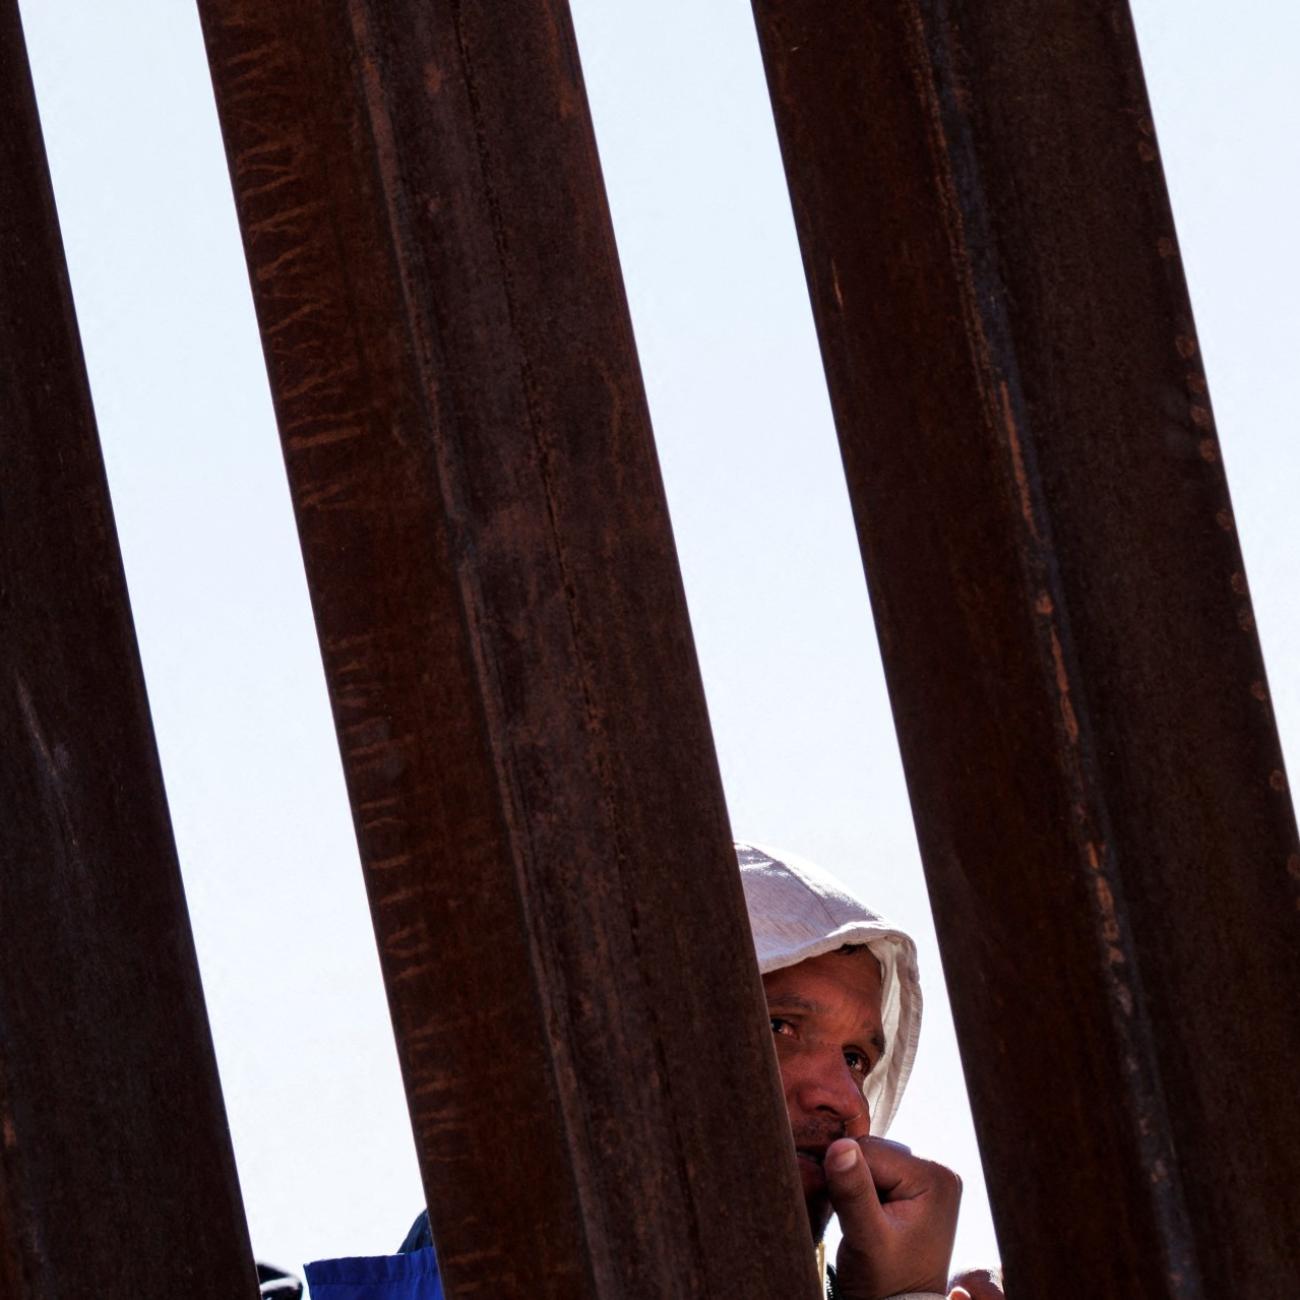 A migrant seeking asylum in the United States waits in line along the border fence at the Rio Bravo River, as seen from El Paso, Texas, on December 22, 2022.its in line along the border fence at the Rio Bravo river, the border between Mexico and the U.S., as seen from El Paso, Texas, on December 22, 2022.